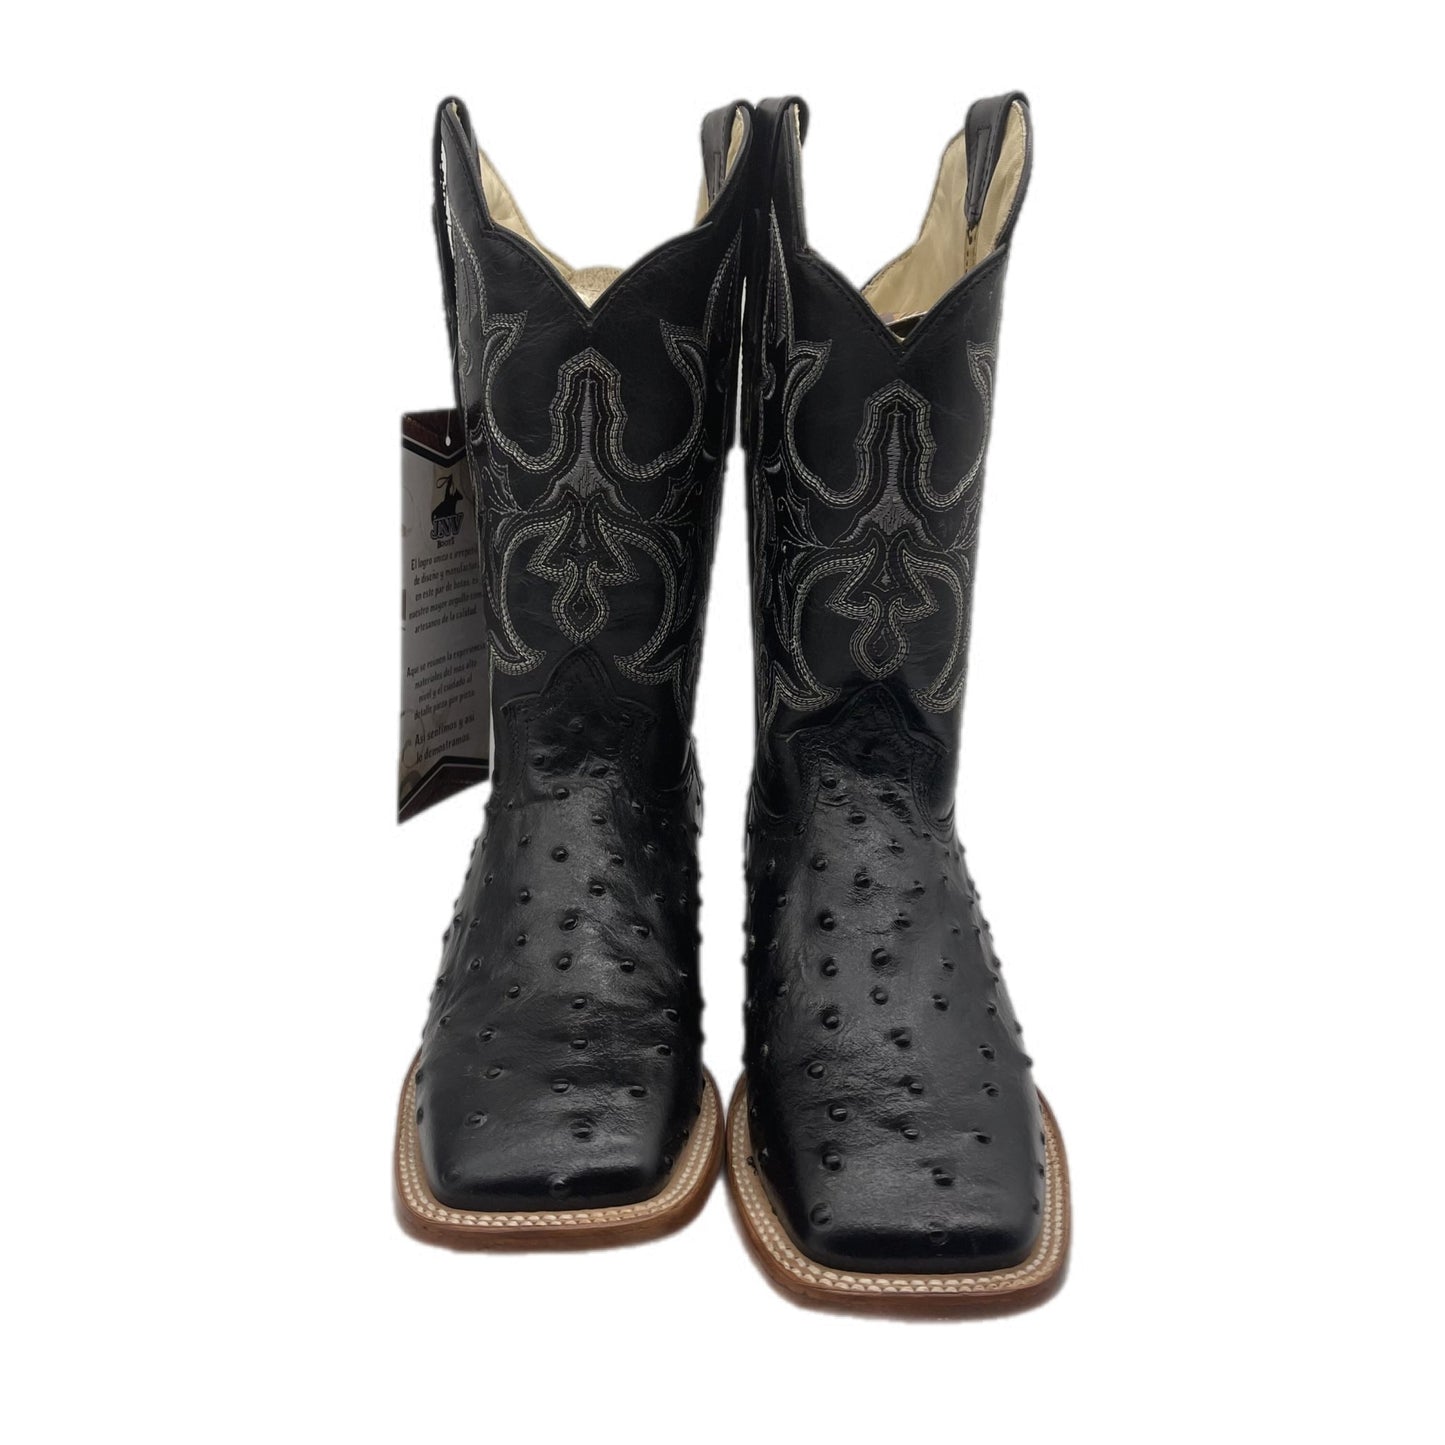 Black Leather Boots with Textured Design - Frontera Western Wear